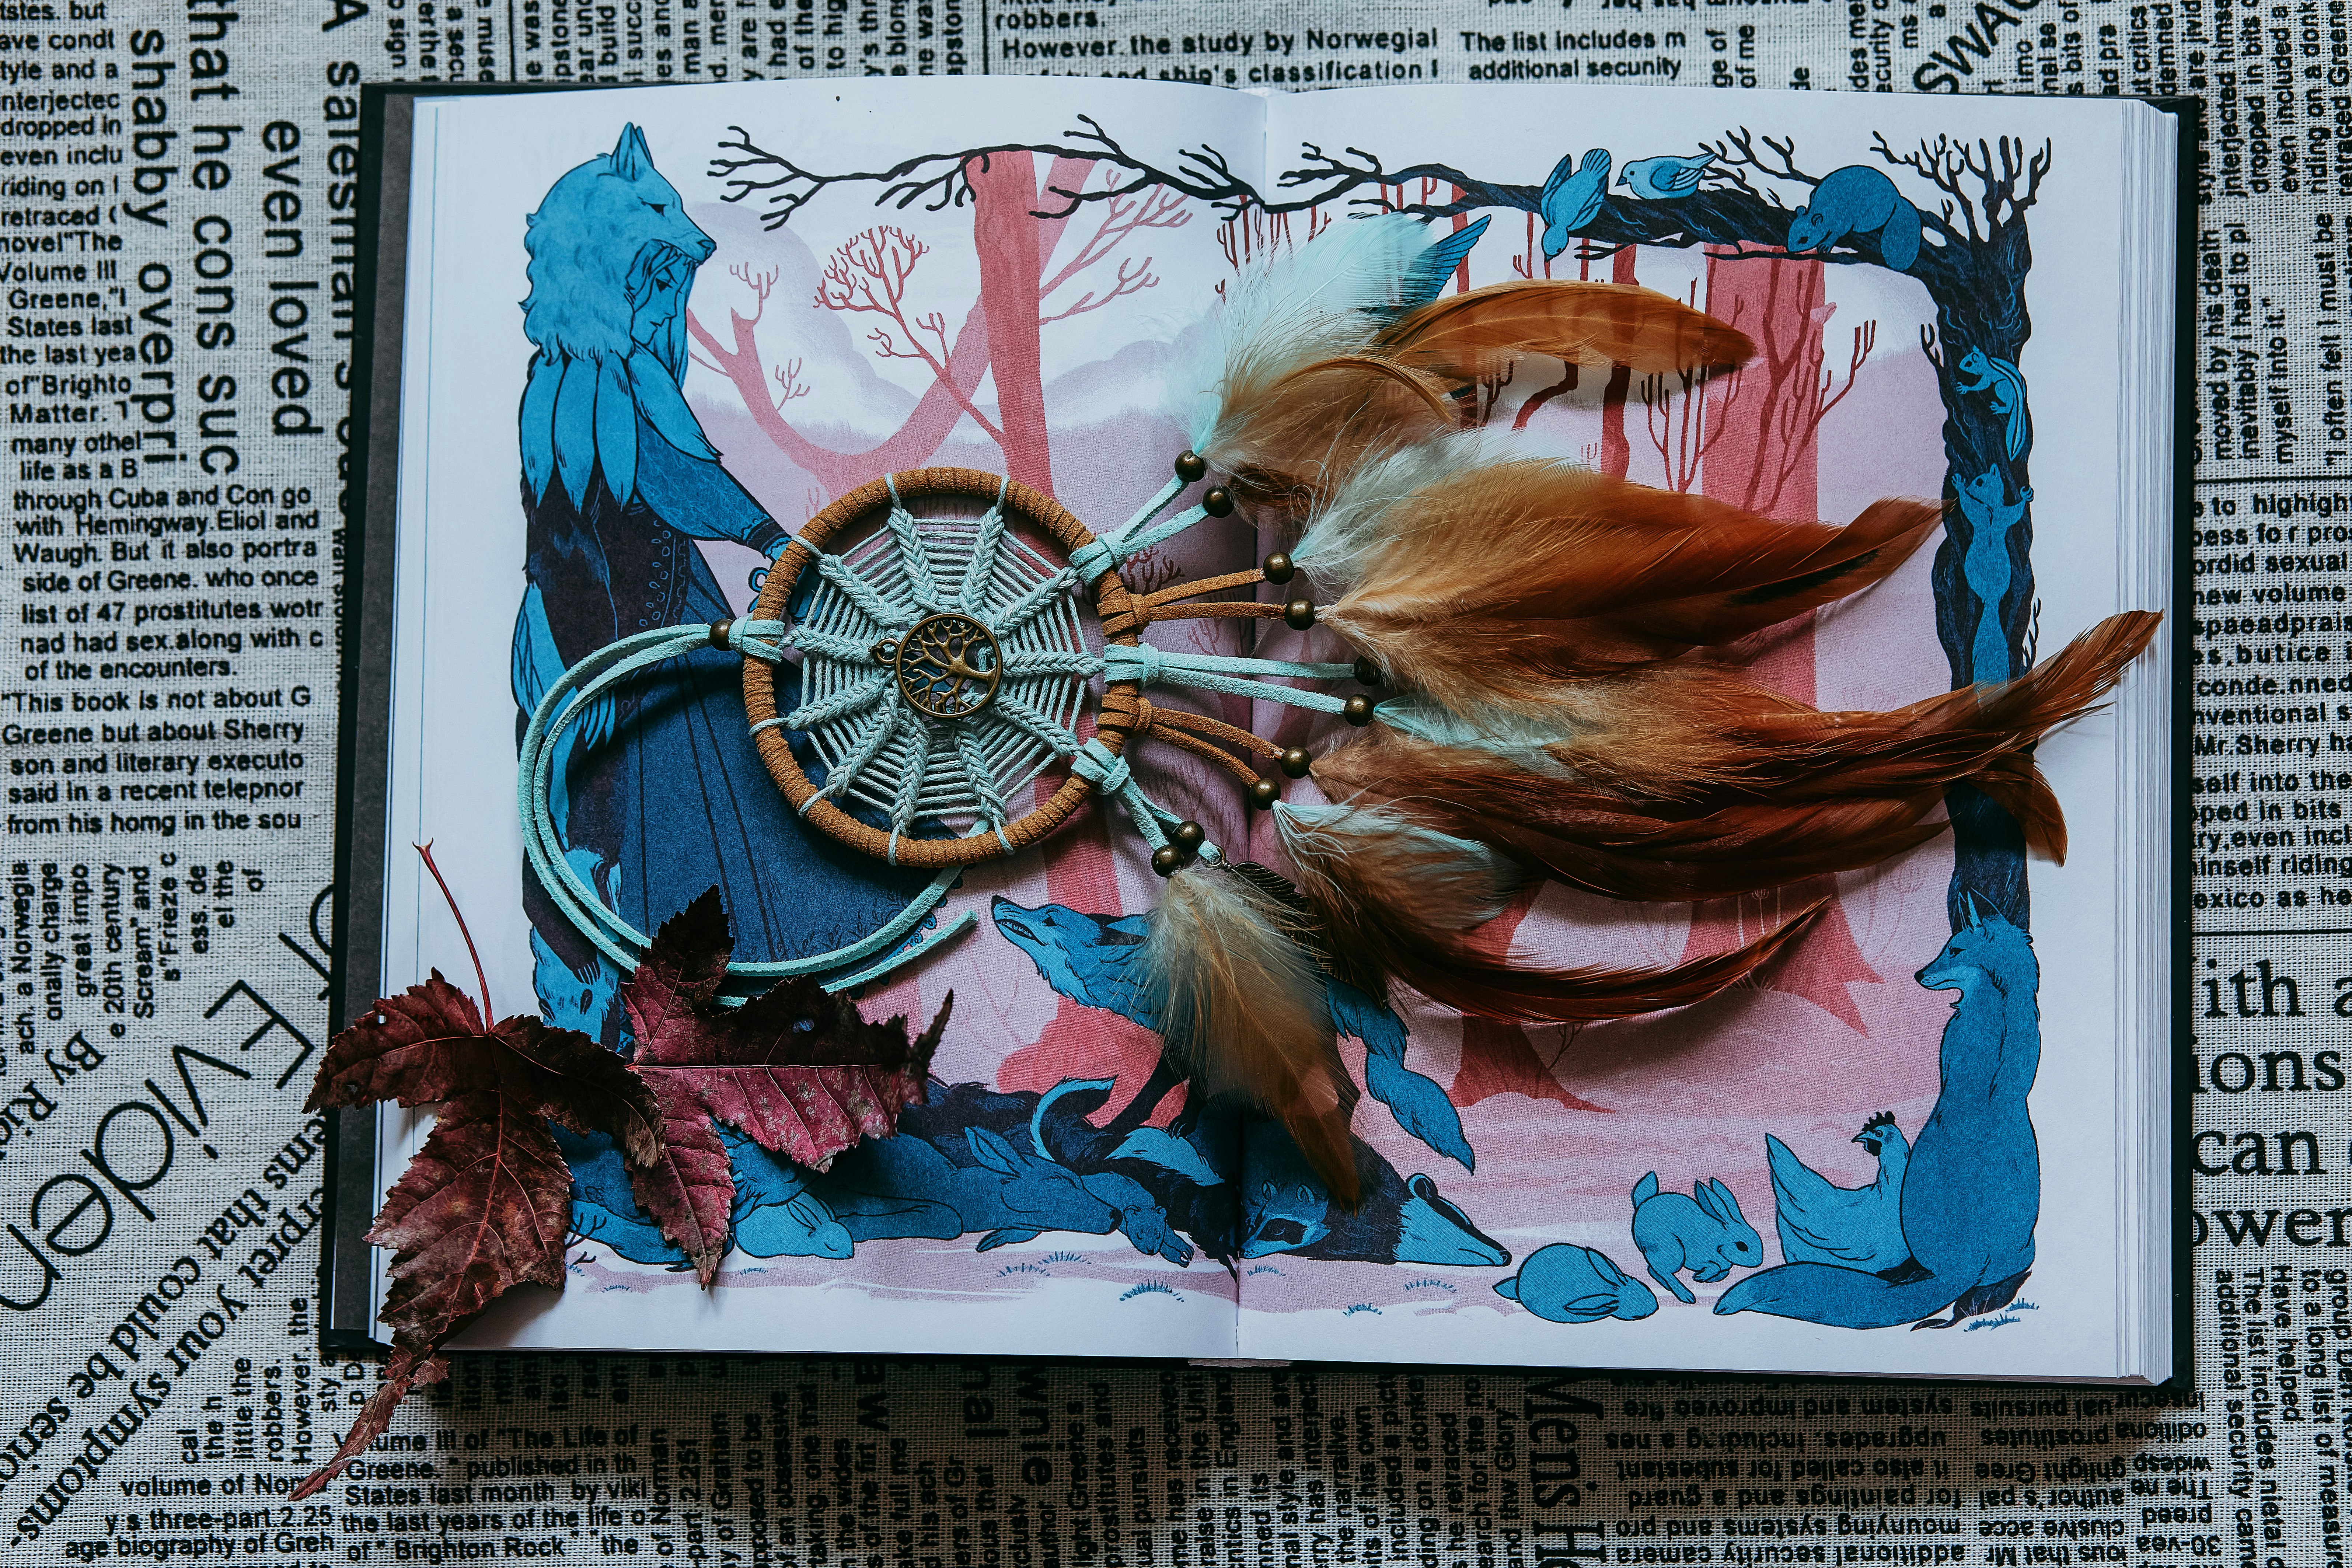 A dream catcher with orange feathers and scarlet leaves on the close-up page of a book.